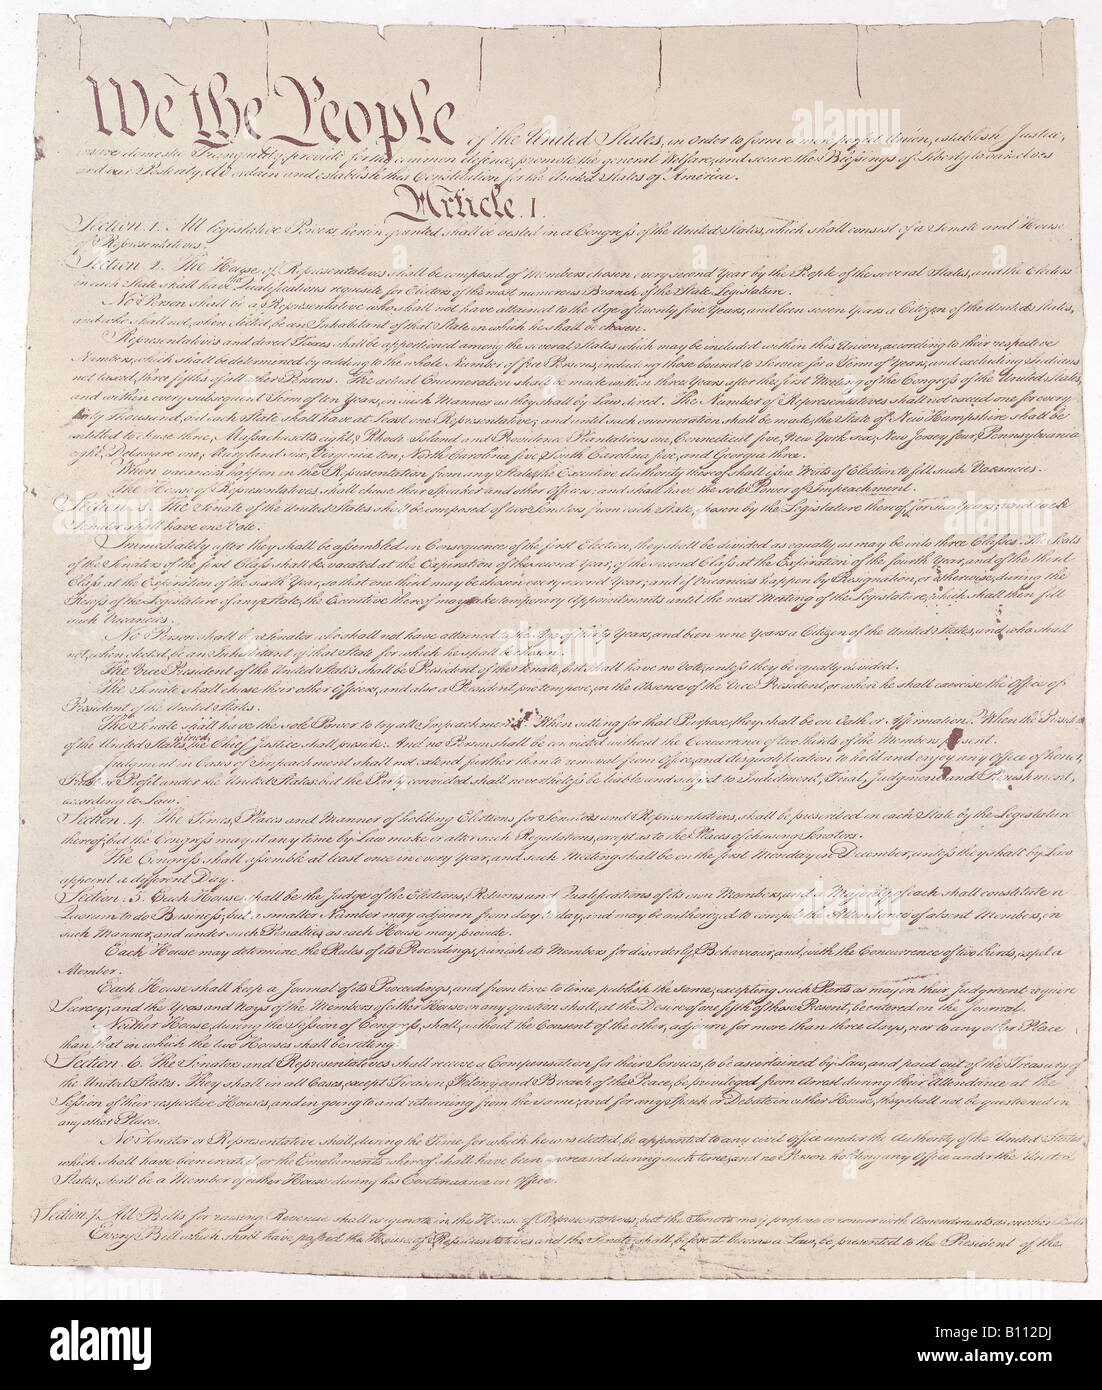 The Constitution of the United States was written to outline fundamental laws in 1787 and ratified in 1789. Stock Photo